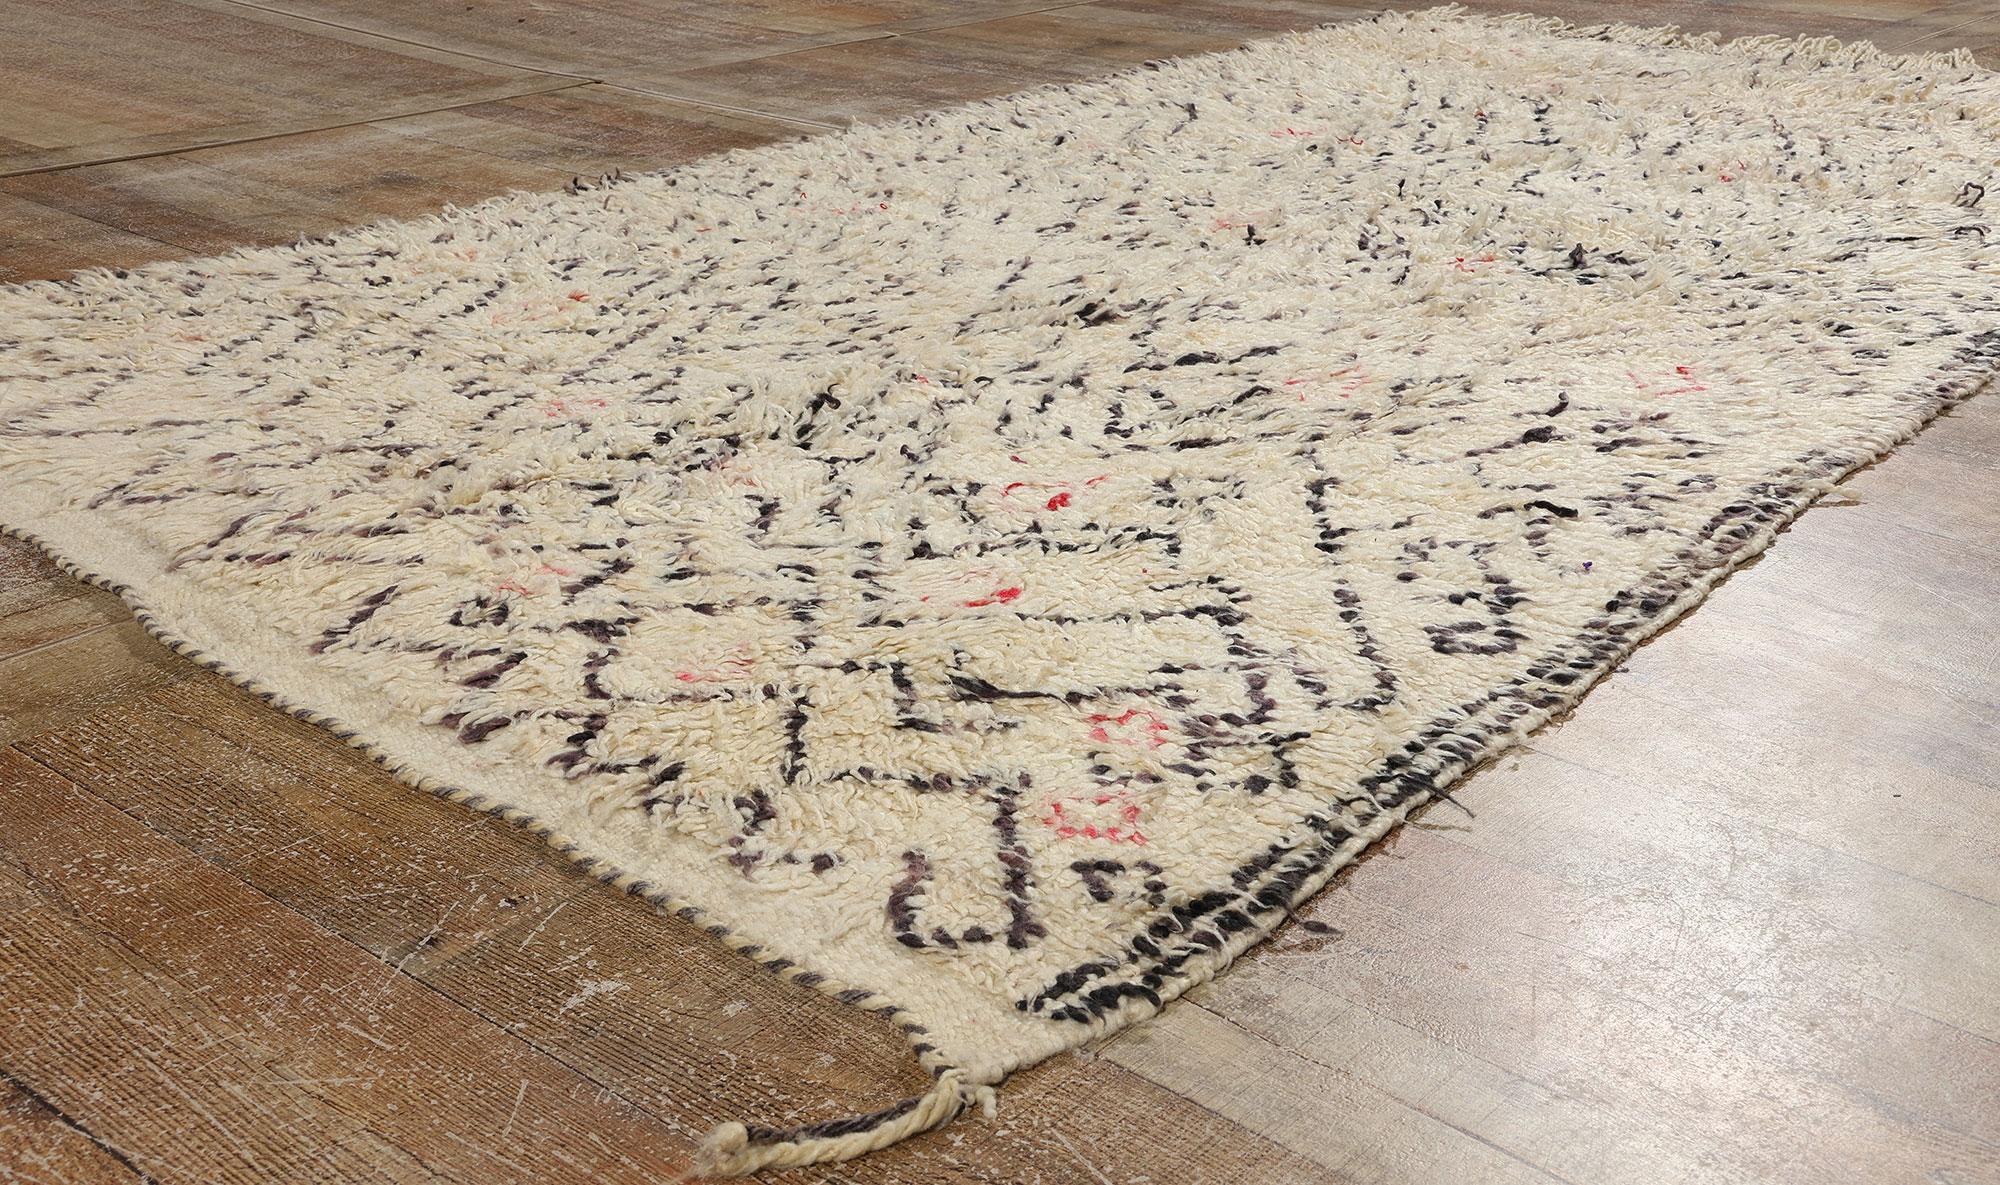 Vintage Berber Moroccan Azilal Rug, Boho Chic Meets Cozy Tribal Enchantment For Sale 1